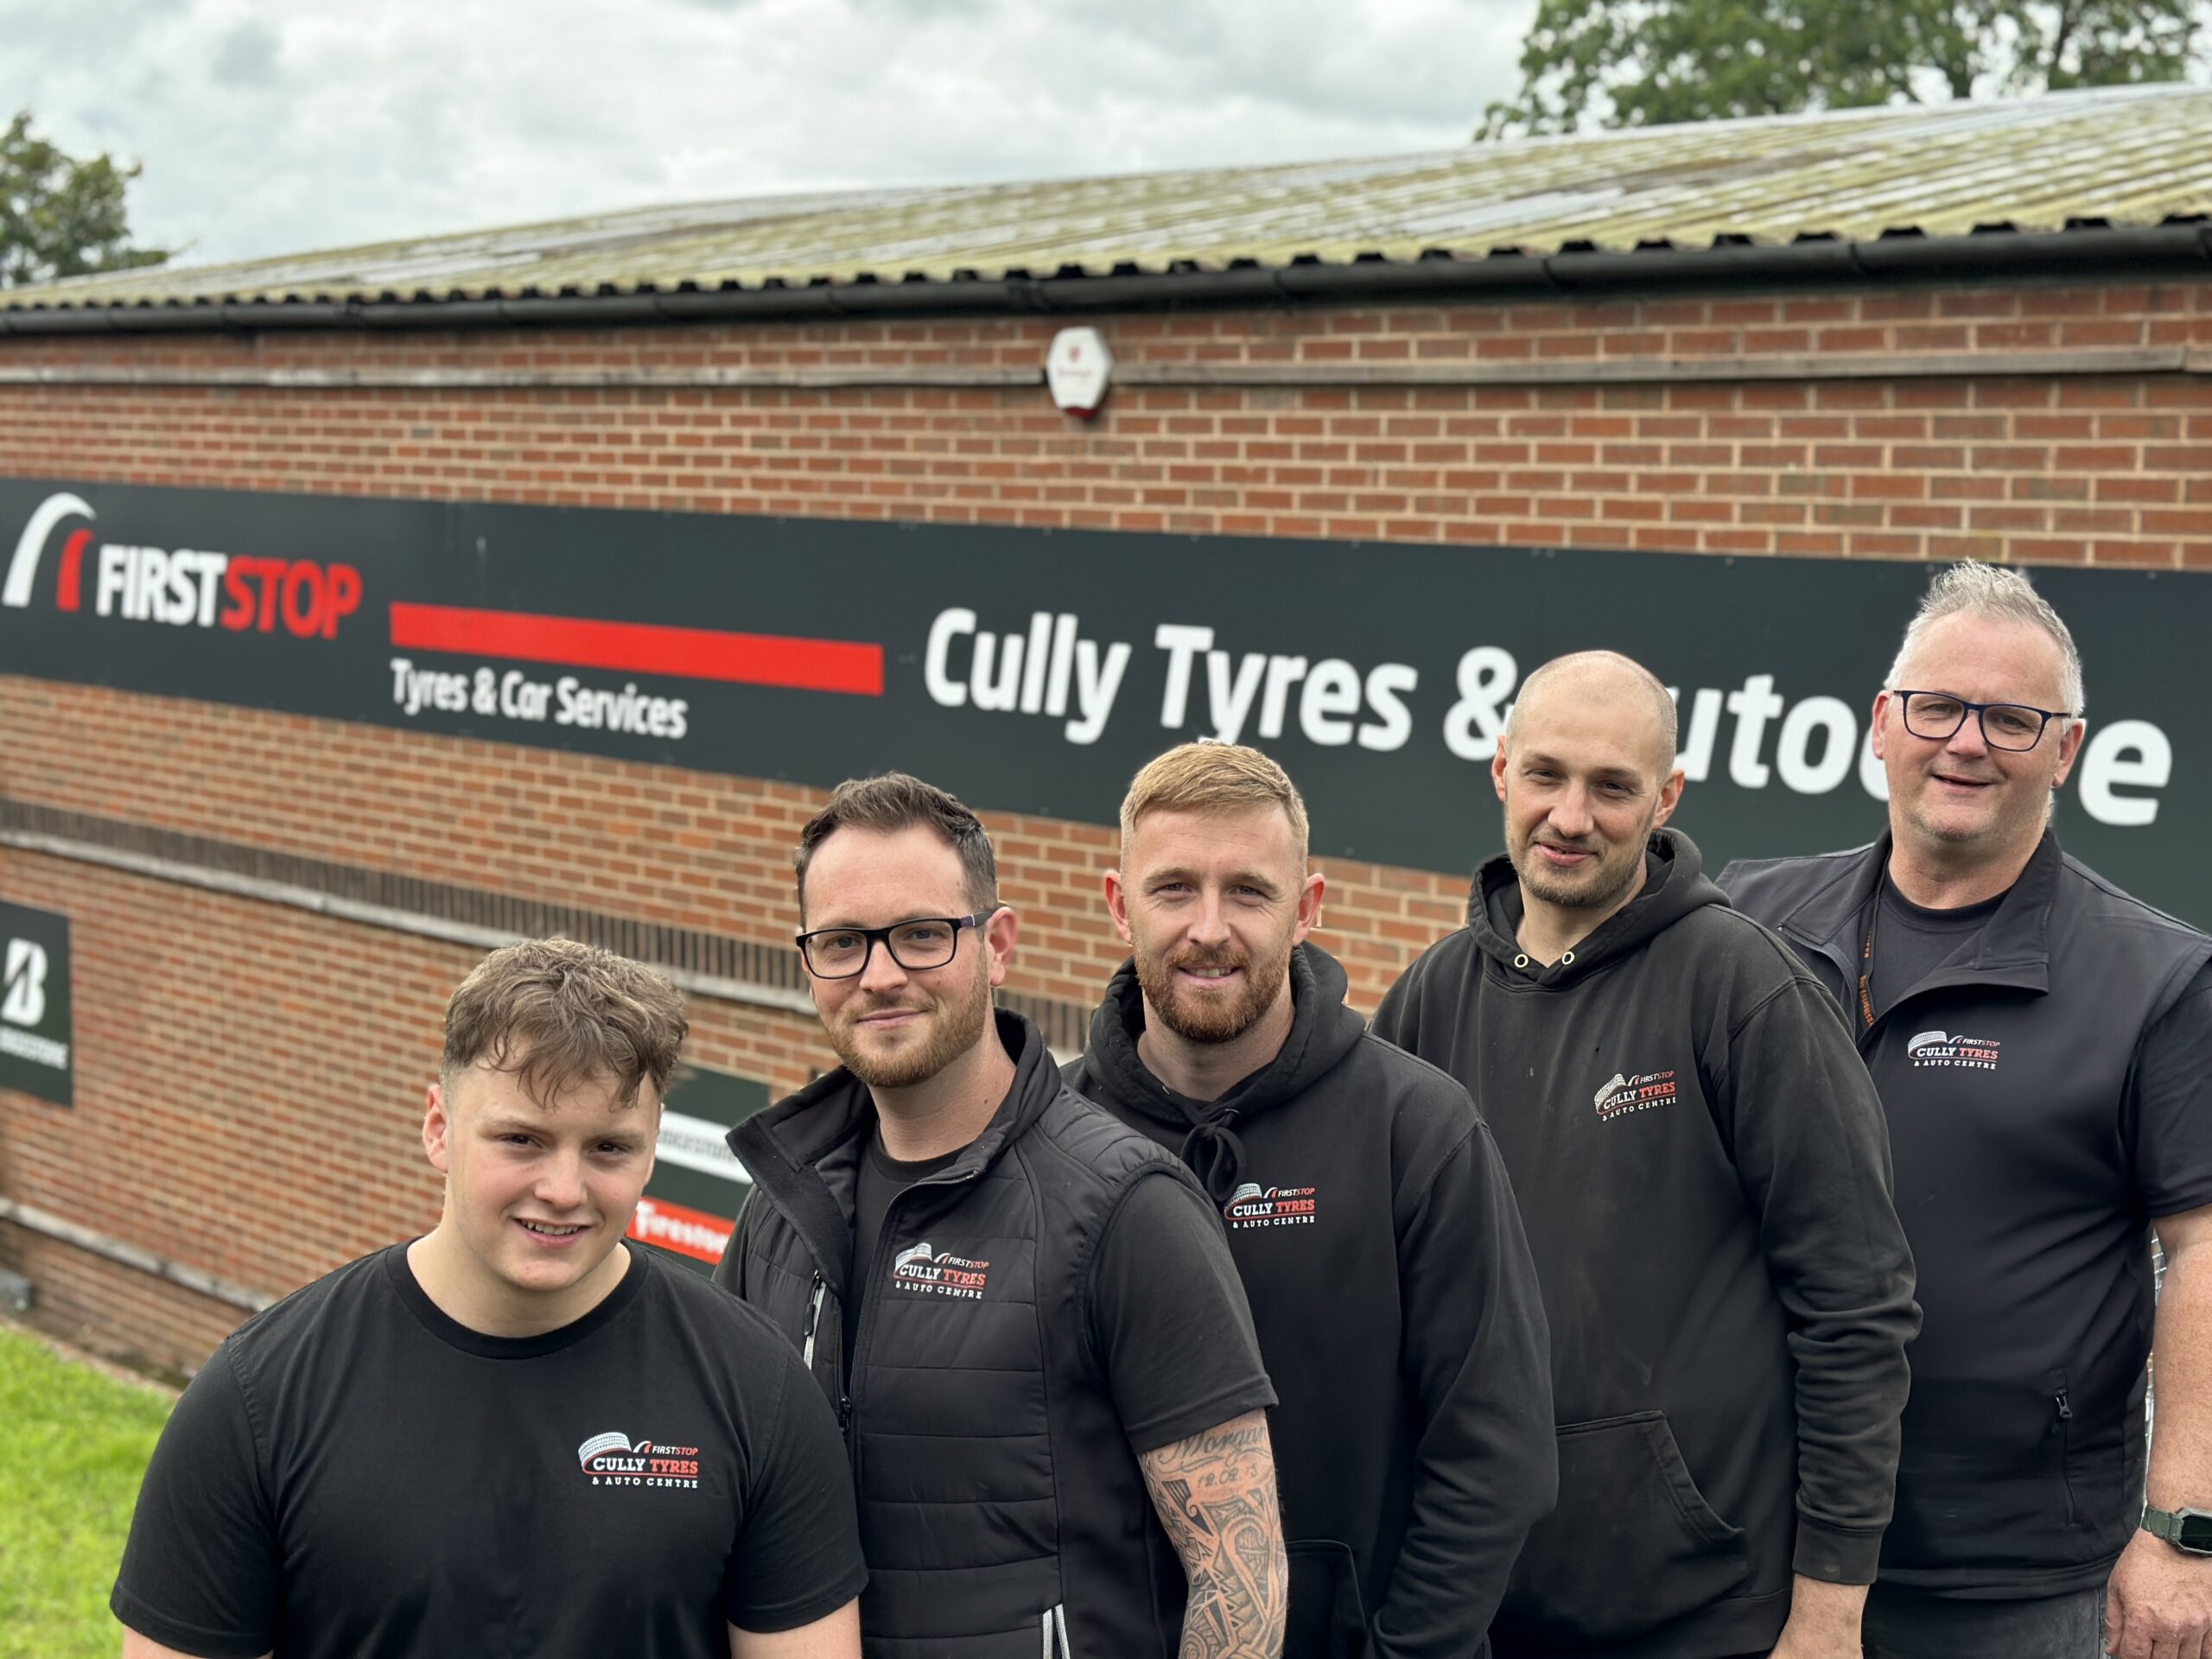 Cully Tyres & Autocare thriving after 6-figure investment, First Stop membership